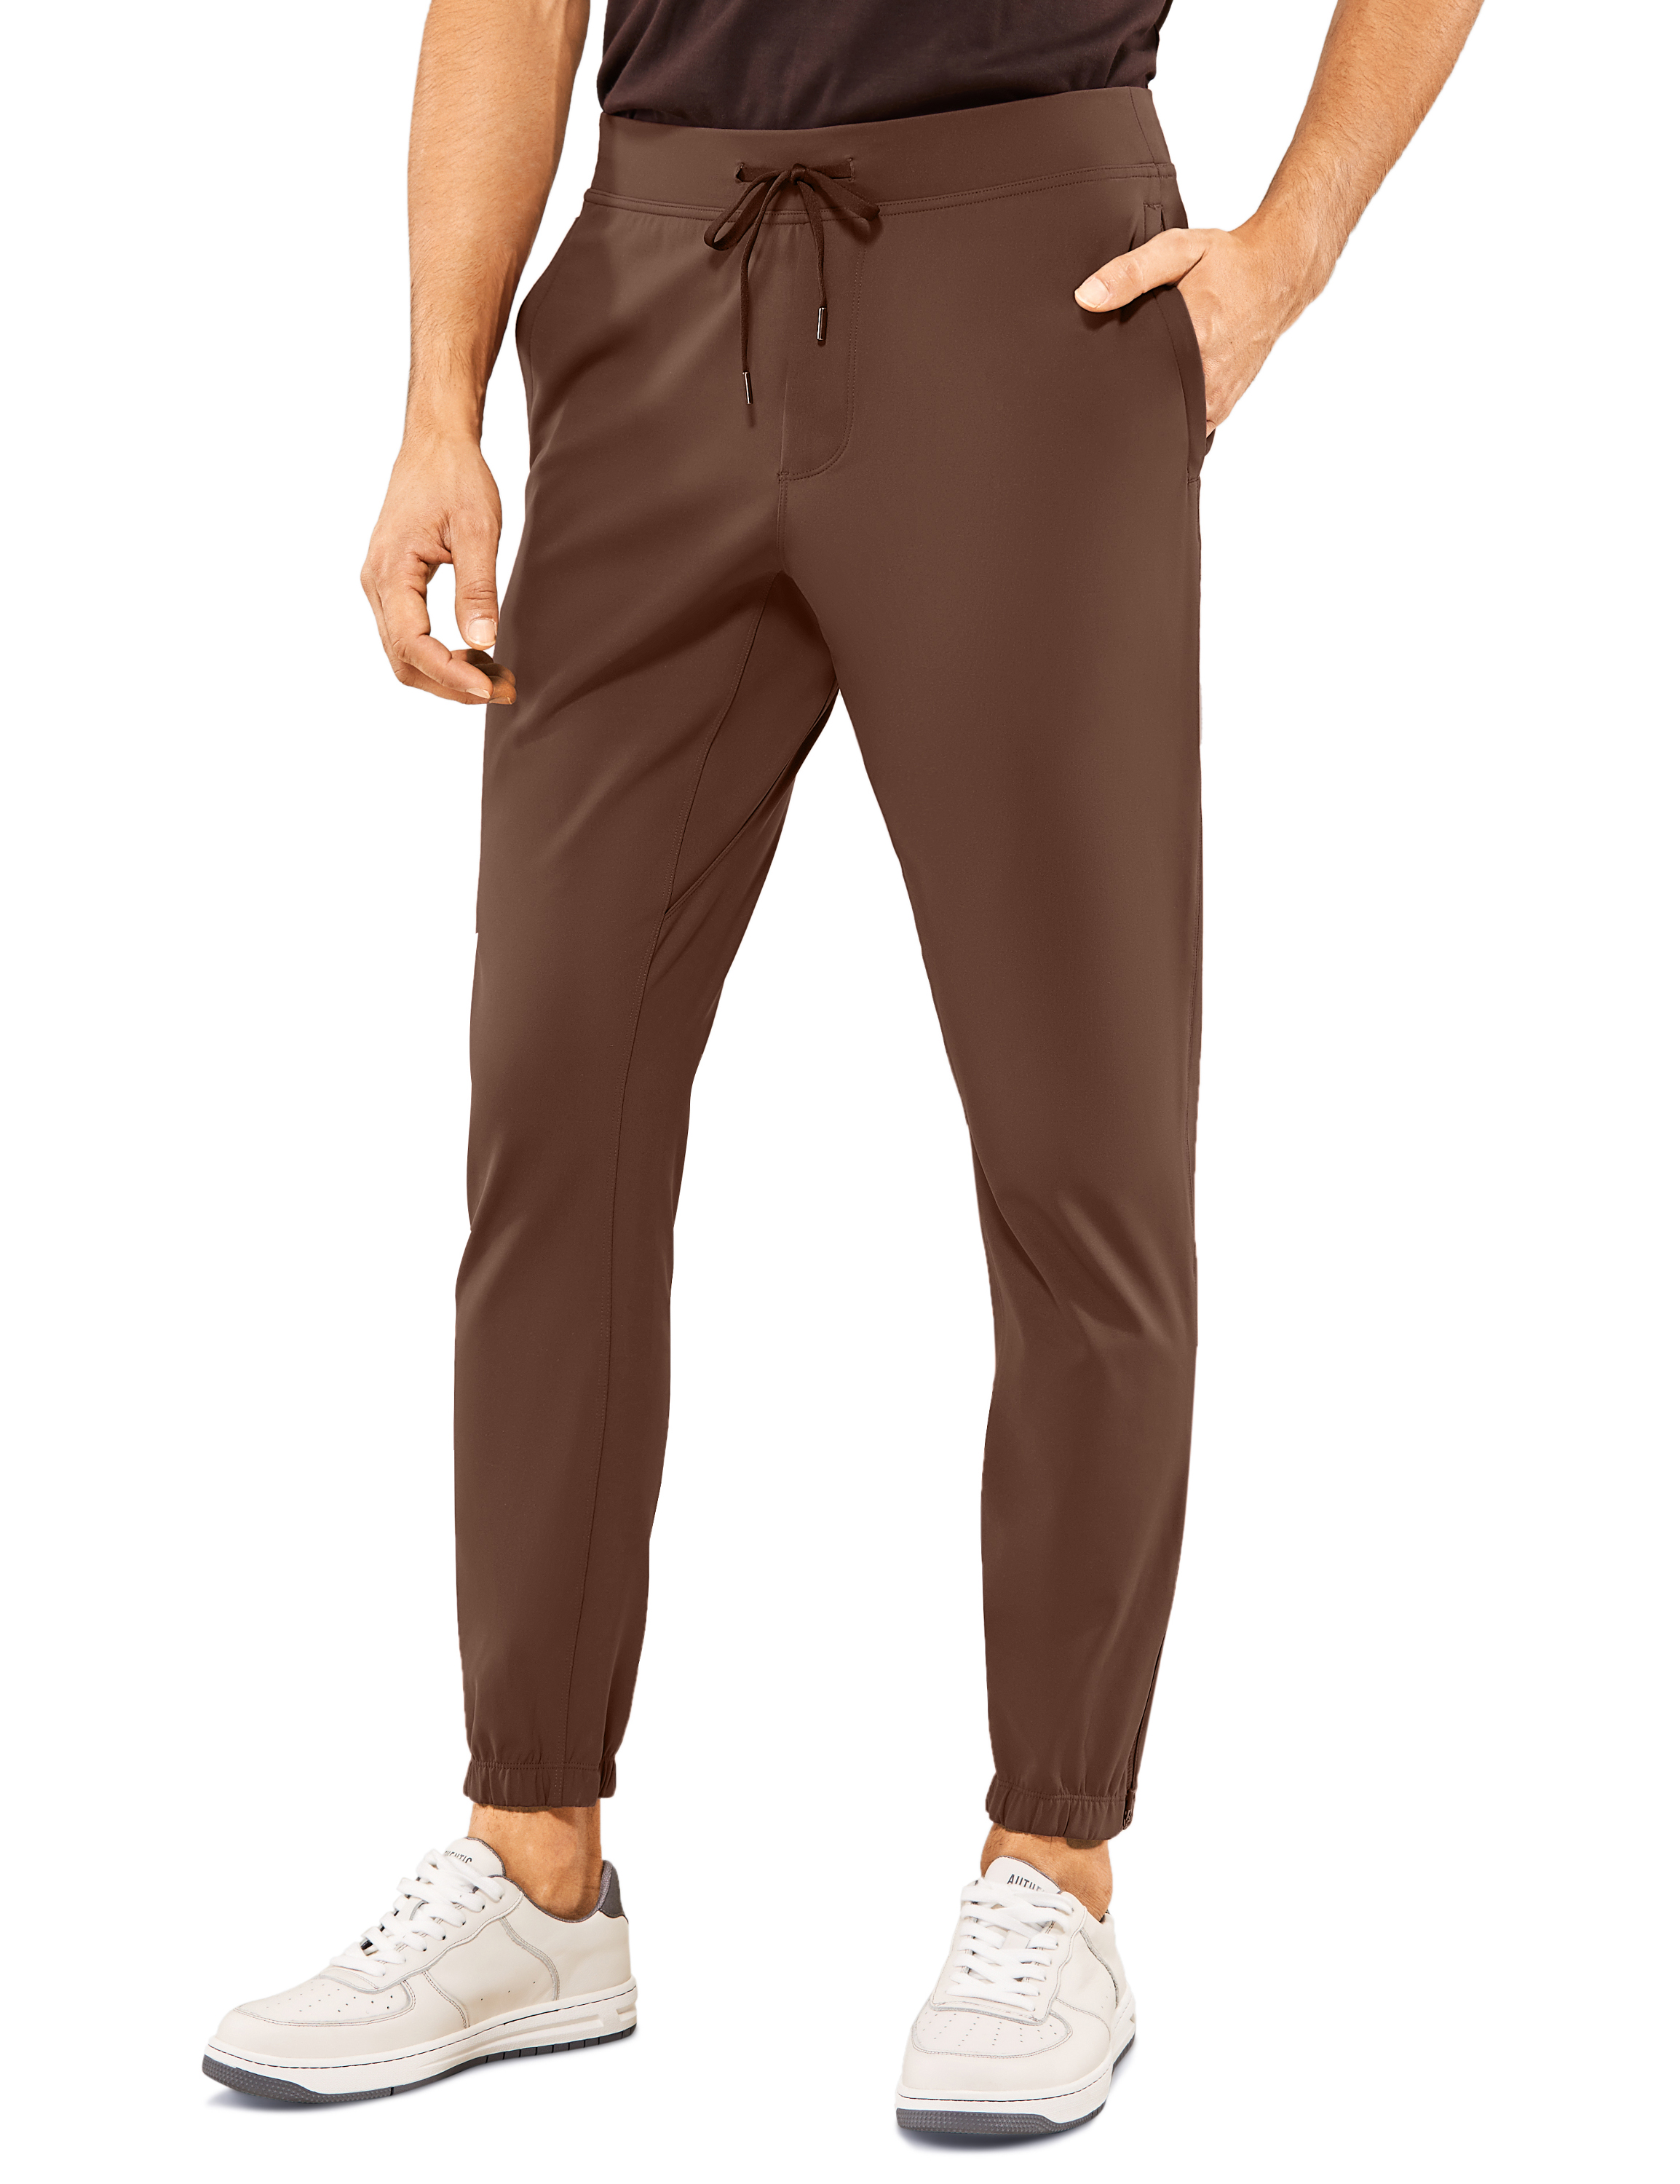 CRZ YOGA On the Travel Men's 30 Inches Golf Joggers Ankle Zipper Hiking  Pants